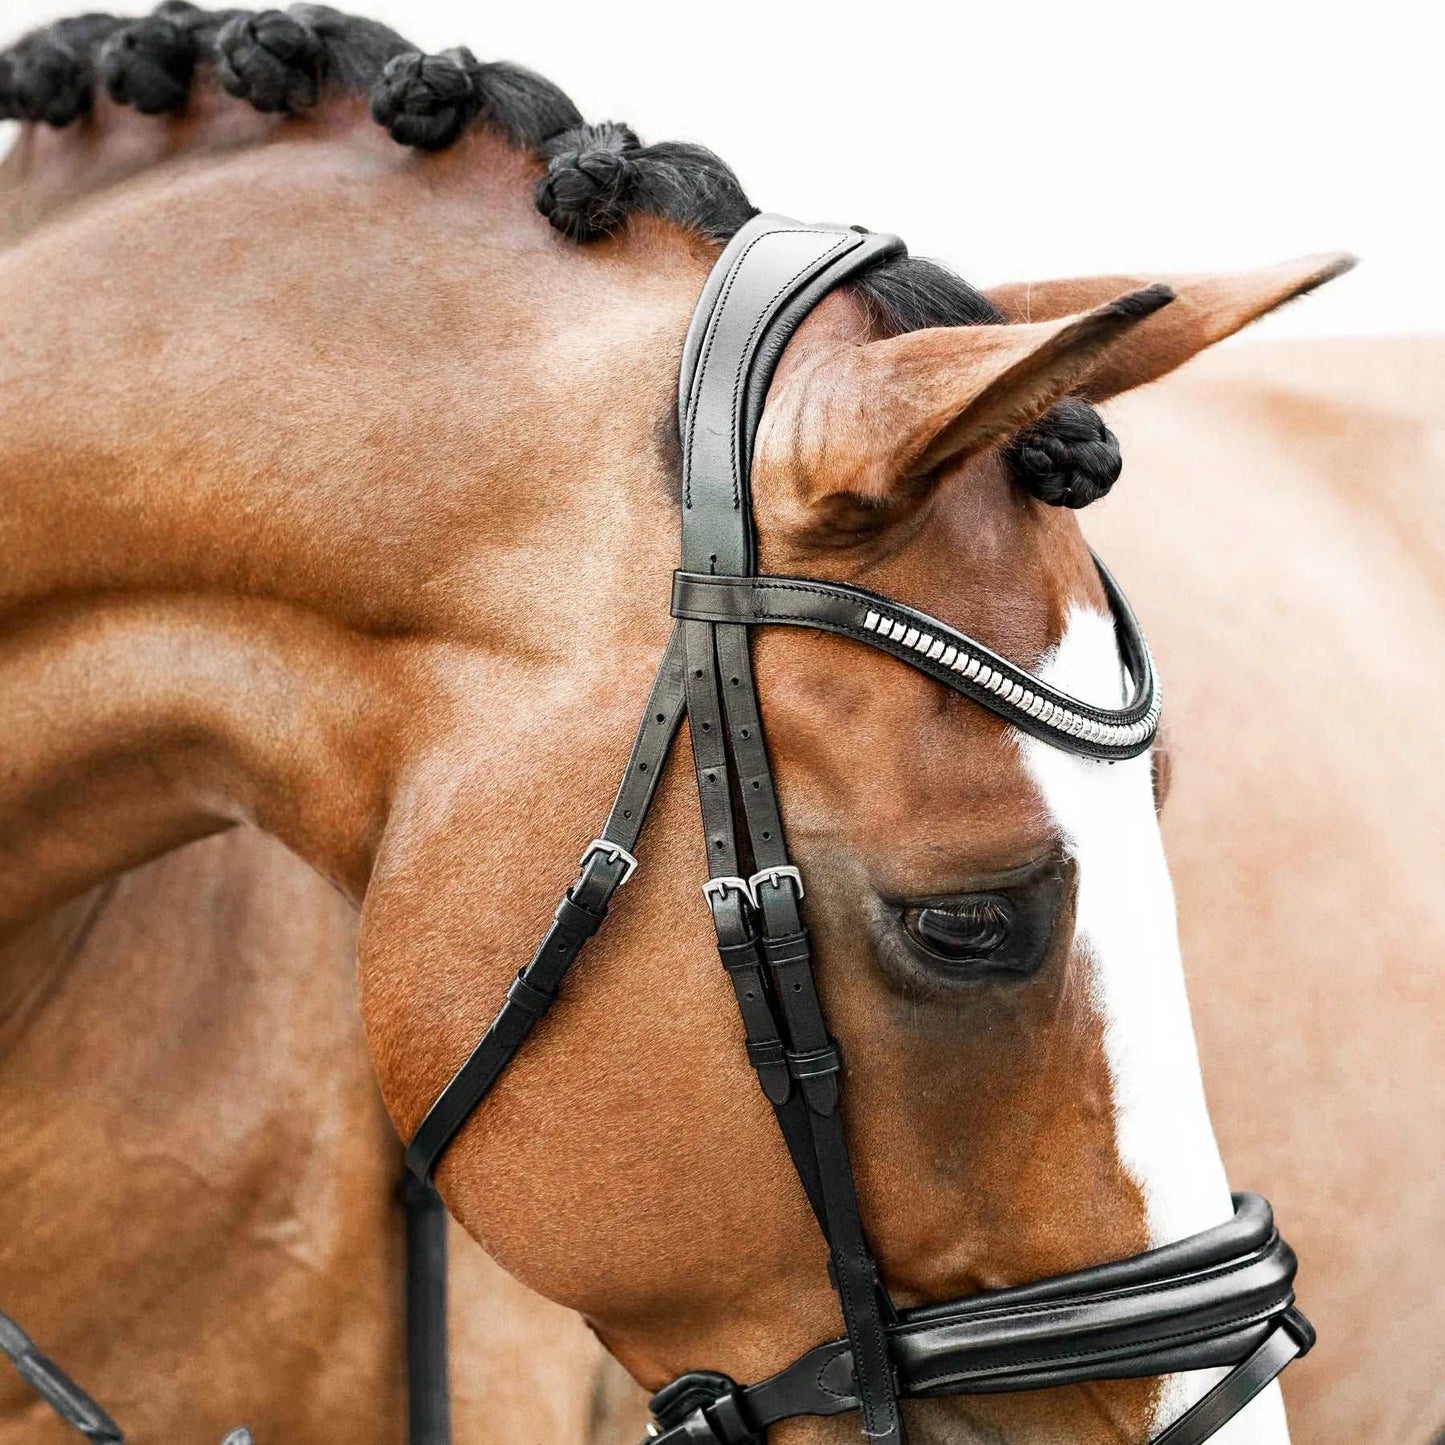 Melodie Classic Bridle